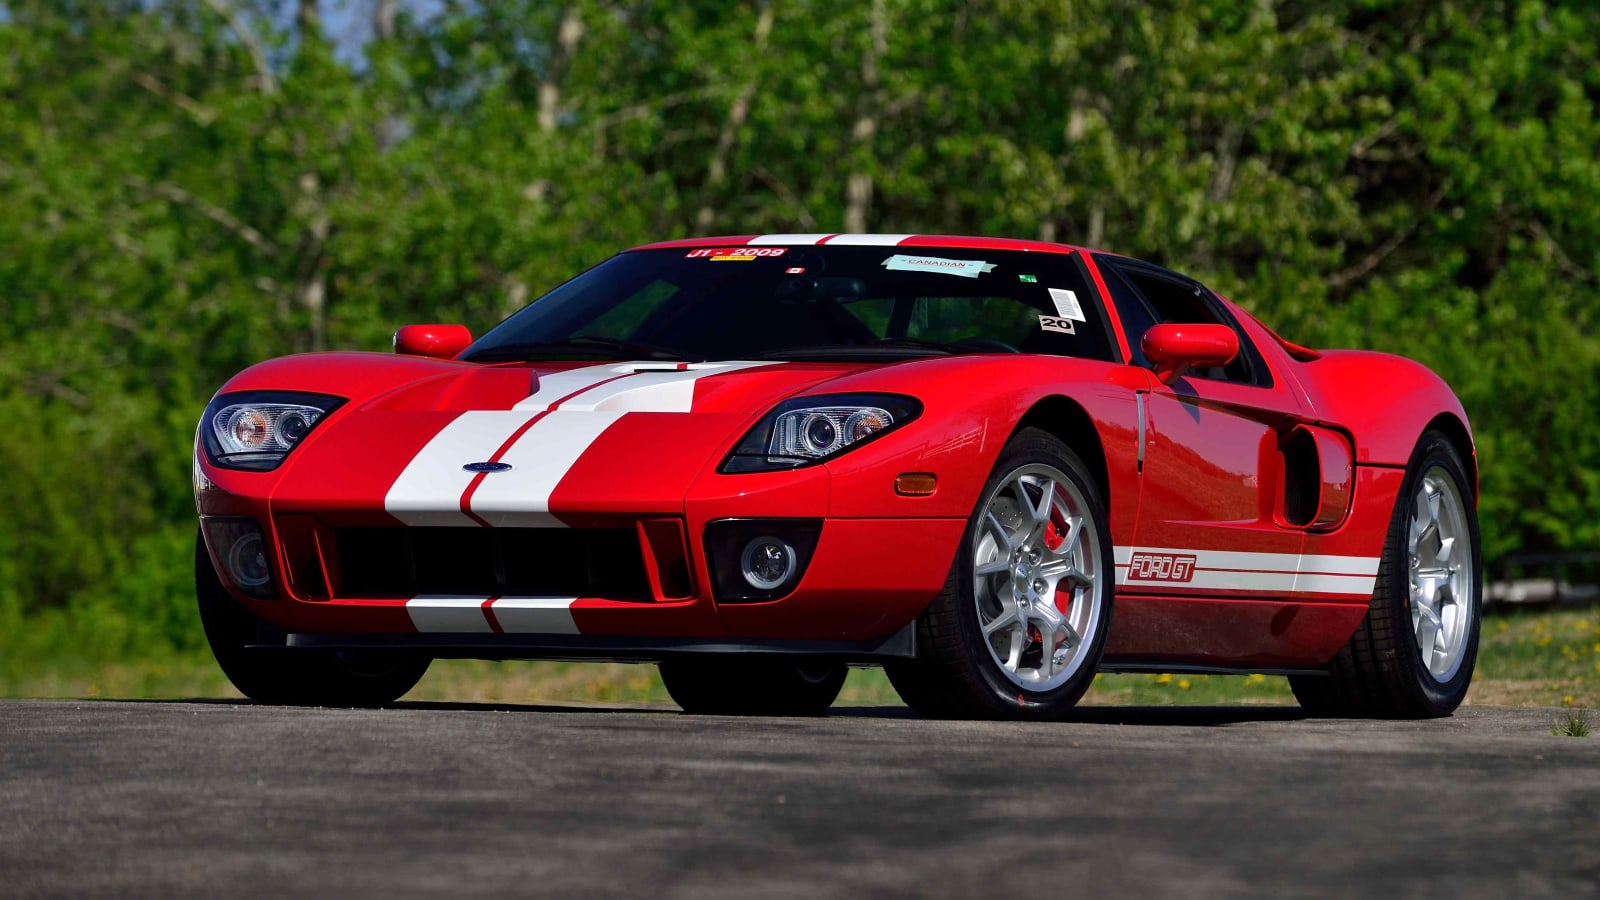 2006 Ford GT at Monterey 2016 as S57 - Mecum Auctions